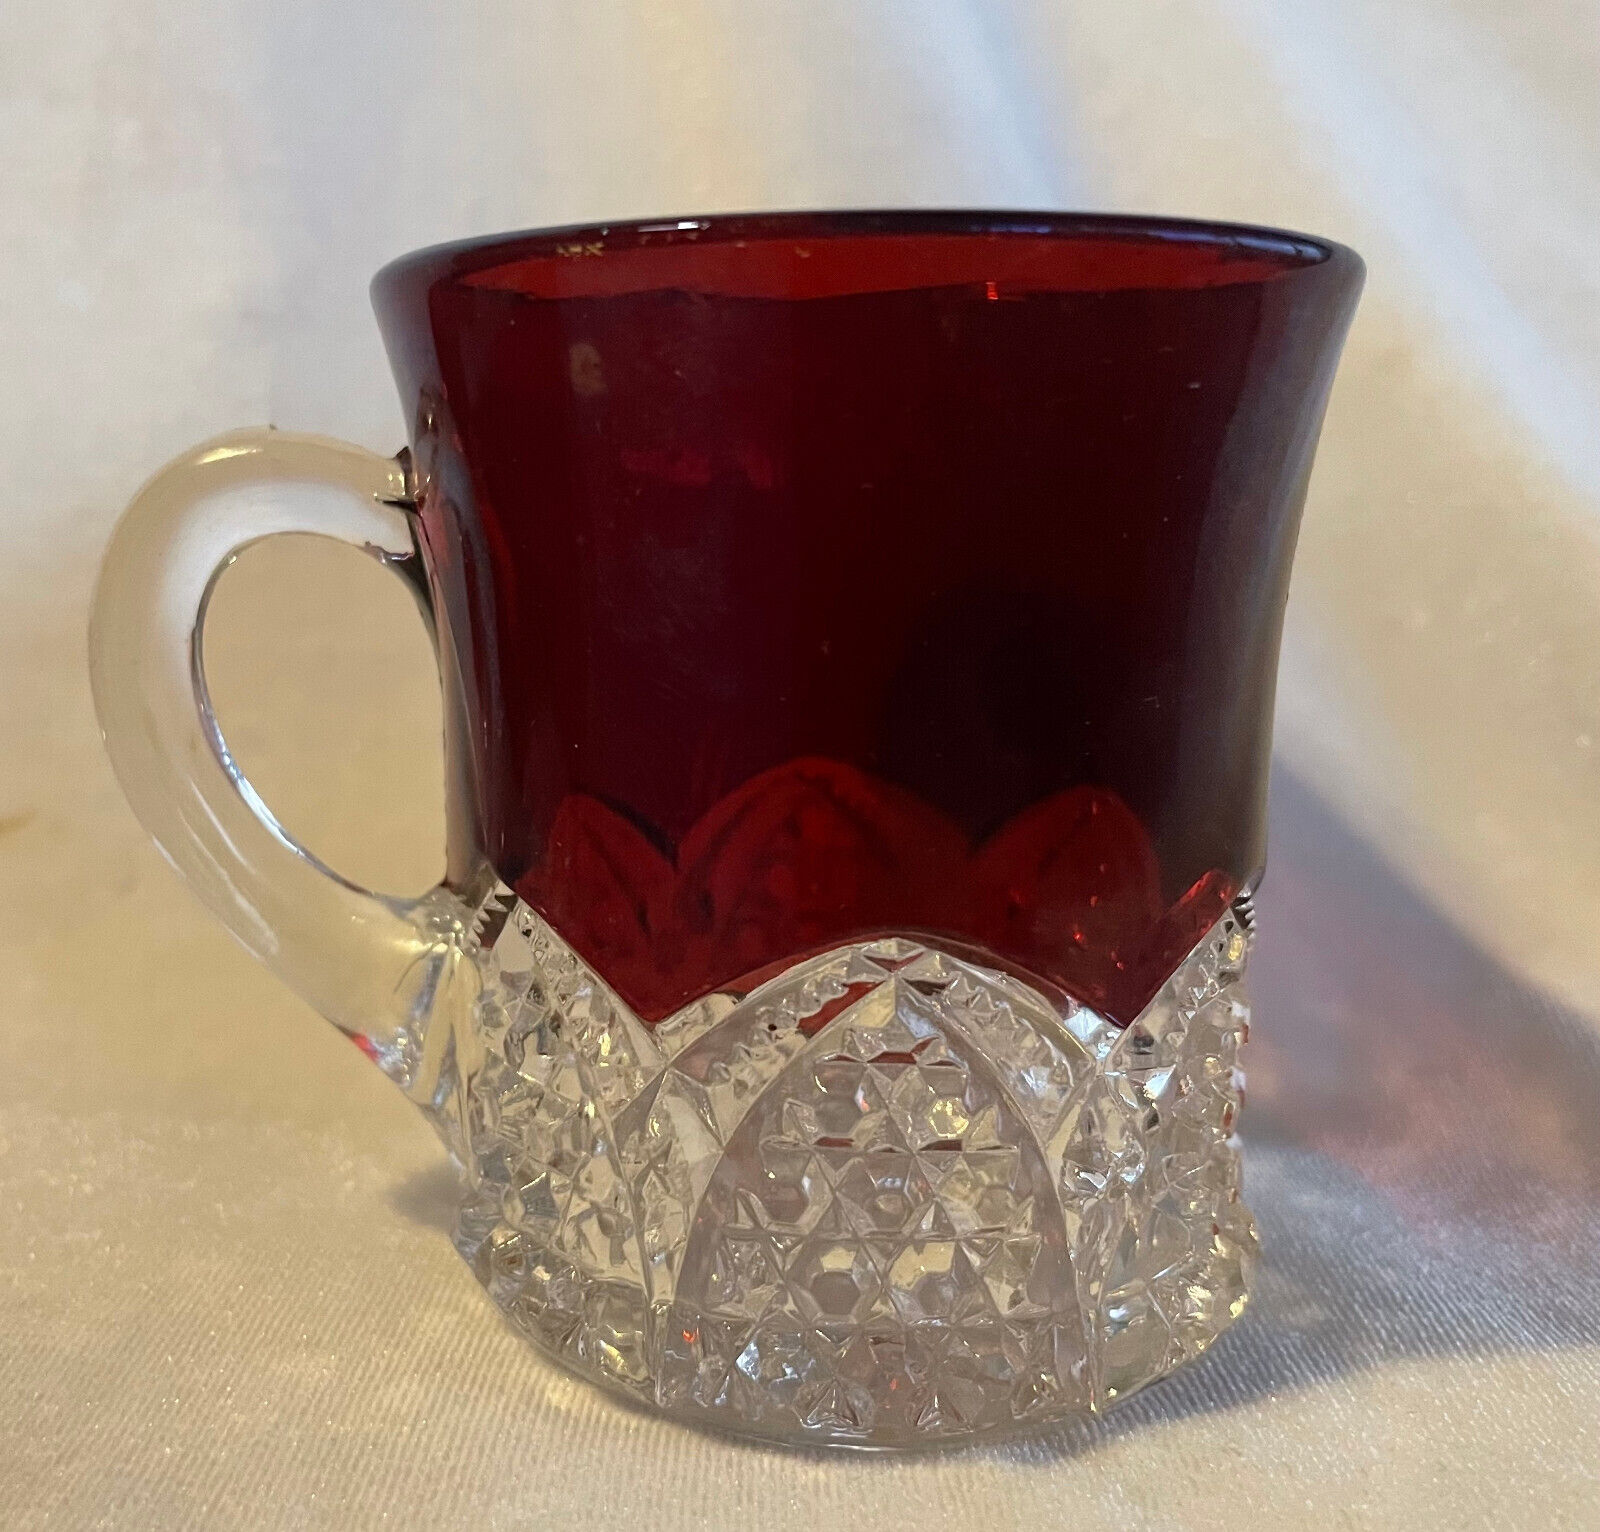 1900s EAPG Duncan Miller Button & Arches Ruby Flashed Mug and Bowl Set Без бренда - фотография #7